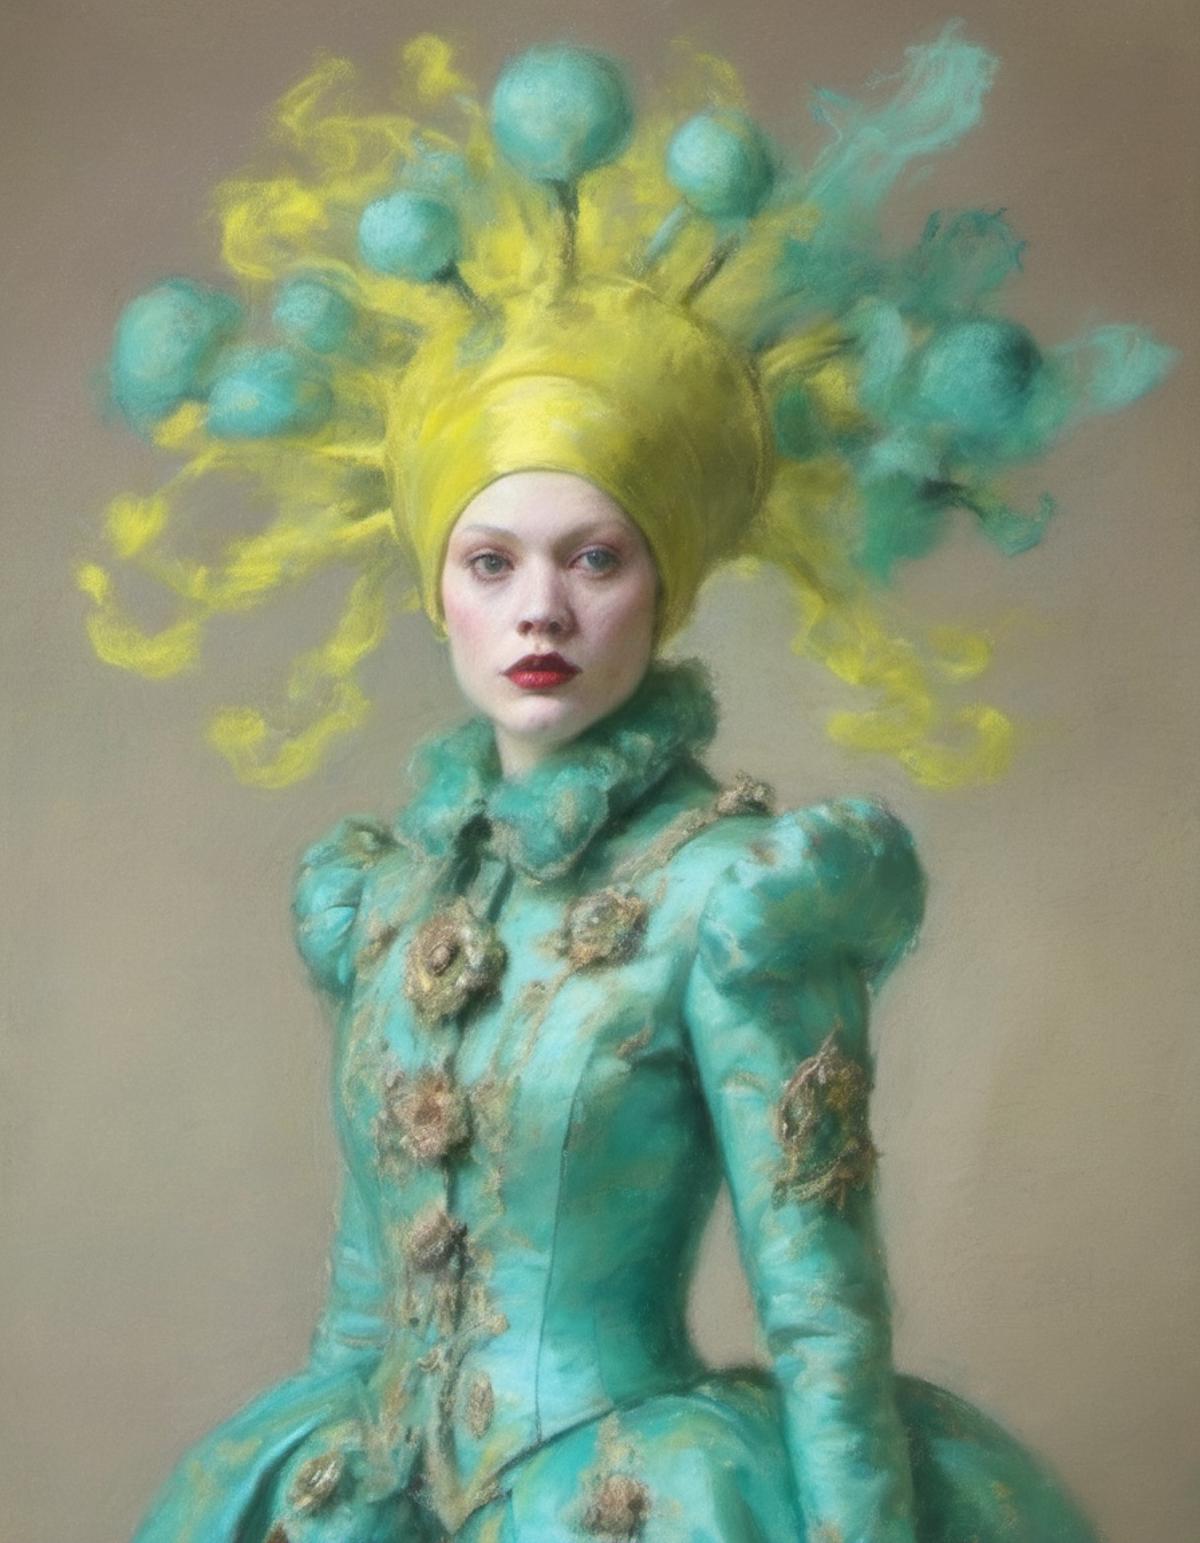 drawing with pastels of absurd haute couture fashion inspired by kessler syndrom nasa universe planets rococo and baroque ...